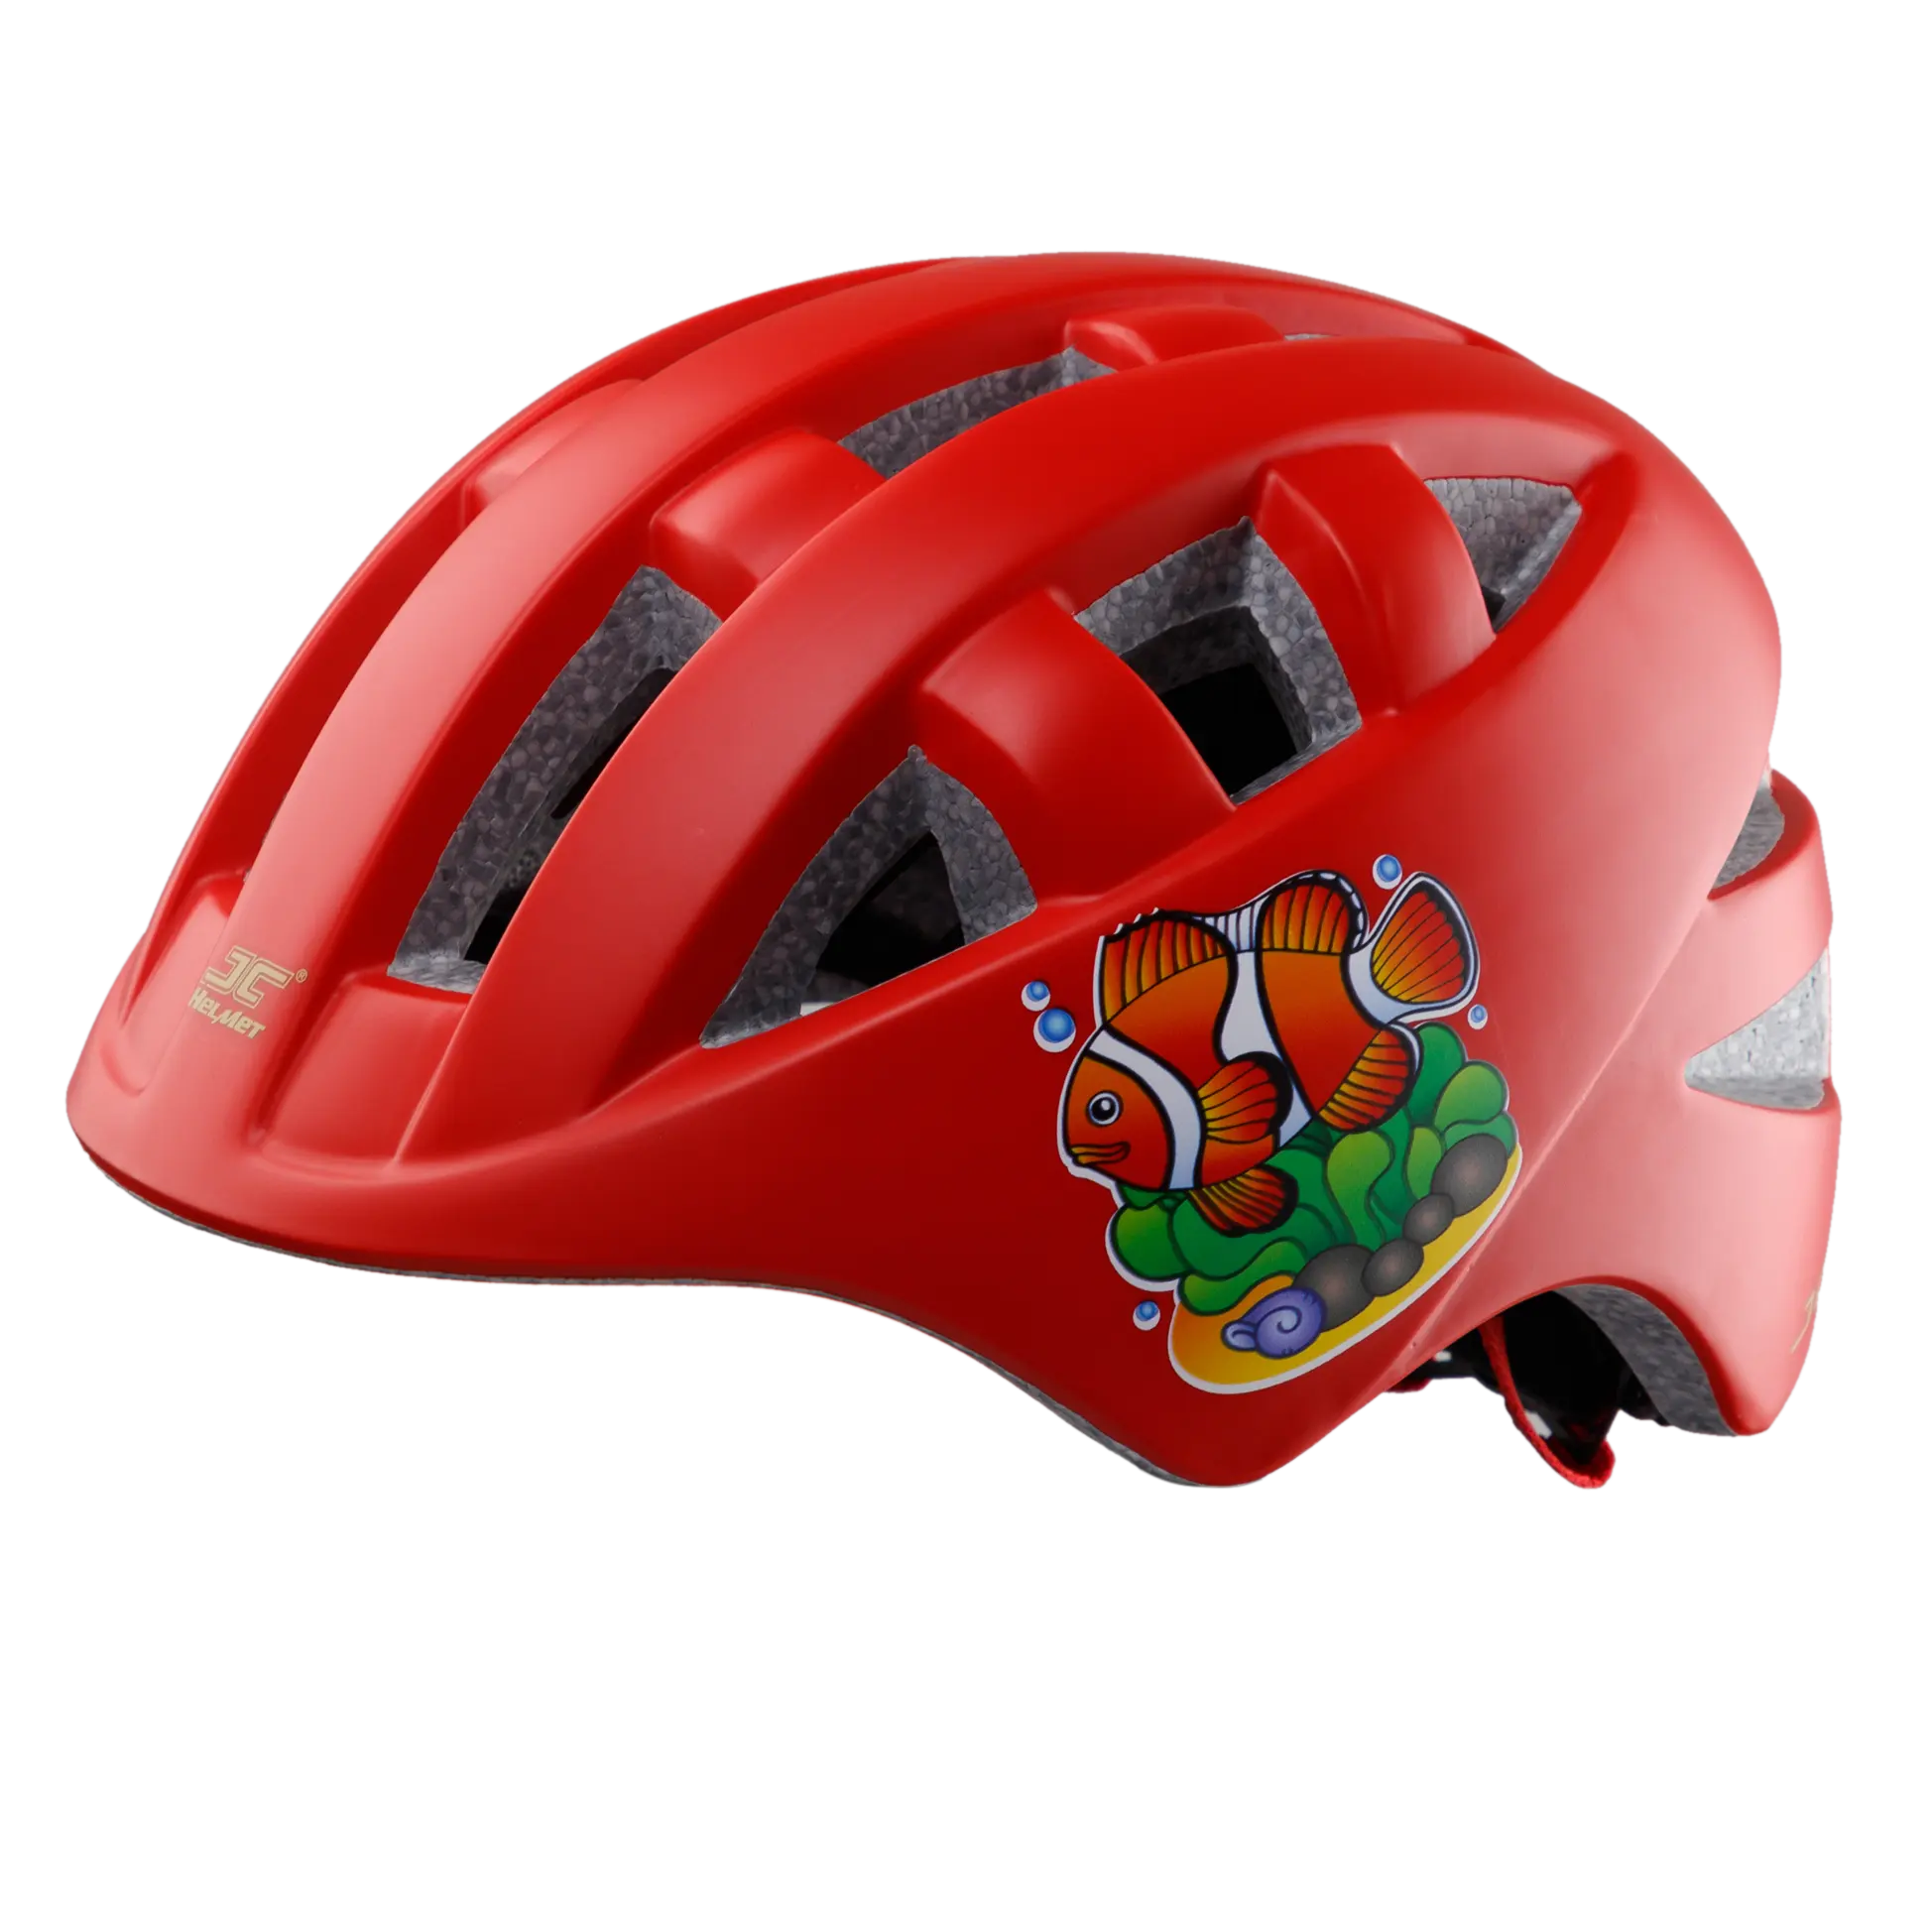 High Quality and Safety JC20 ROYAL Vietnam Bicycle Helmet Face Protection Modern Light Weigh For Kids with Manufacturer Price